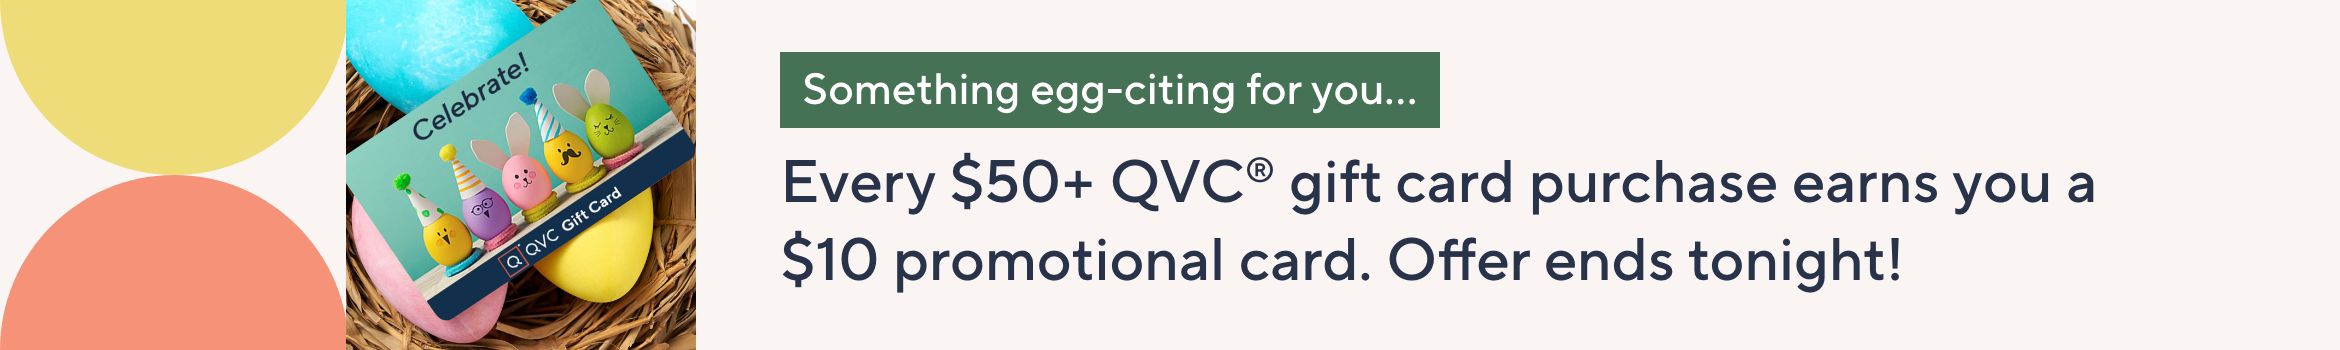 Something egg-citing for you… Every $50+ QVC® gift card purchase earns you a $10 promotional card. Offer ends tonight!